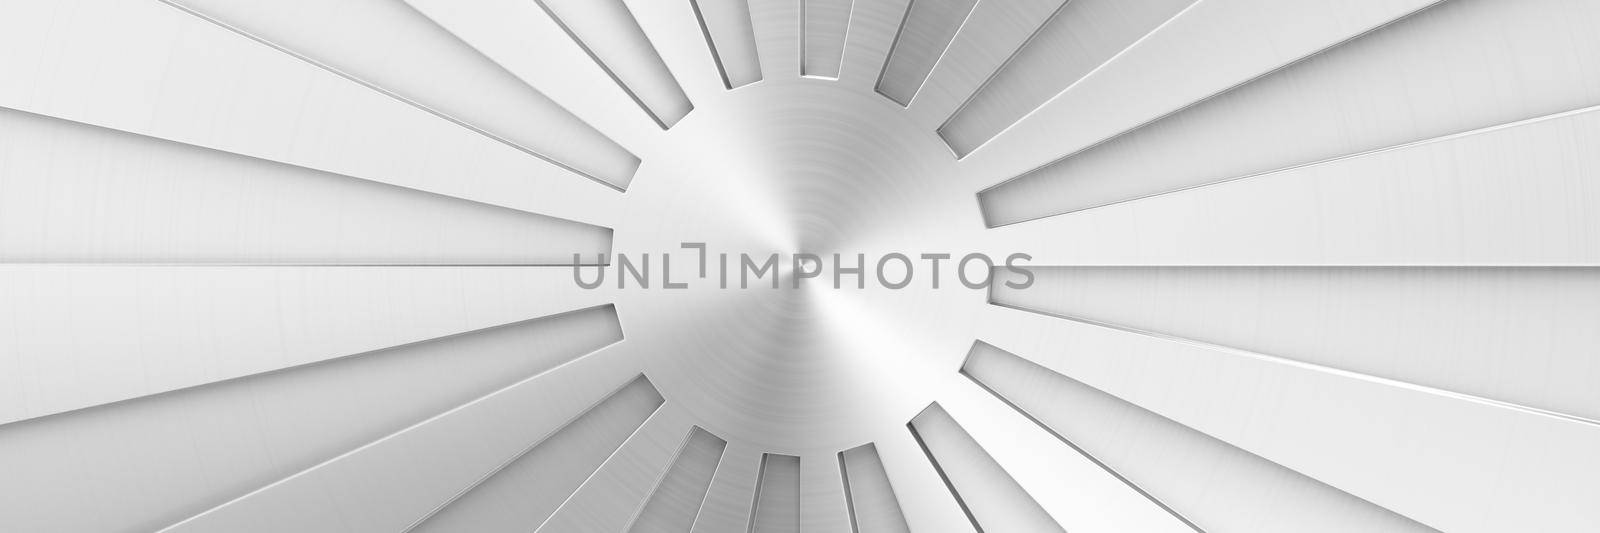 Silver metal background. Brushed metallic texture. 3d rendering by Taut